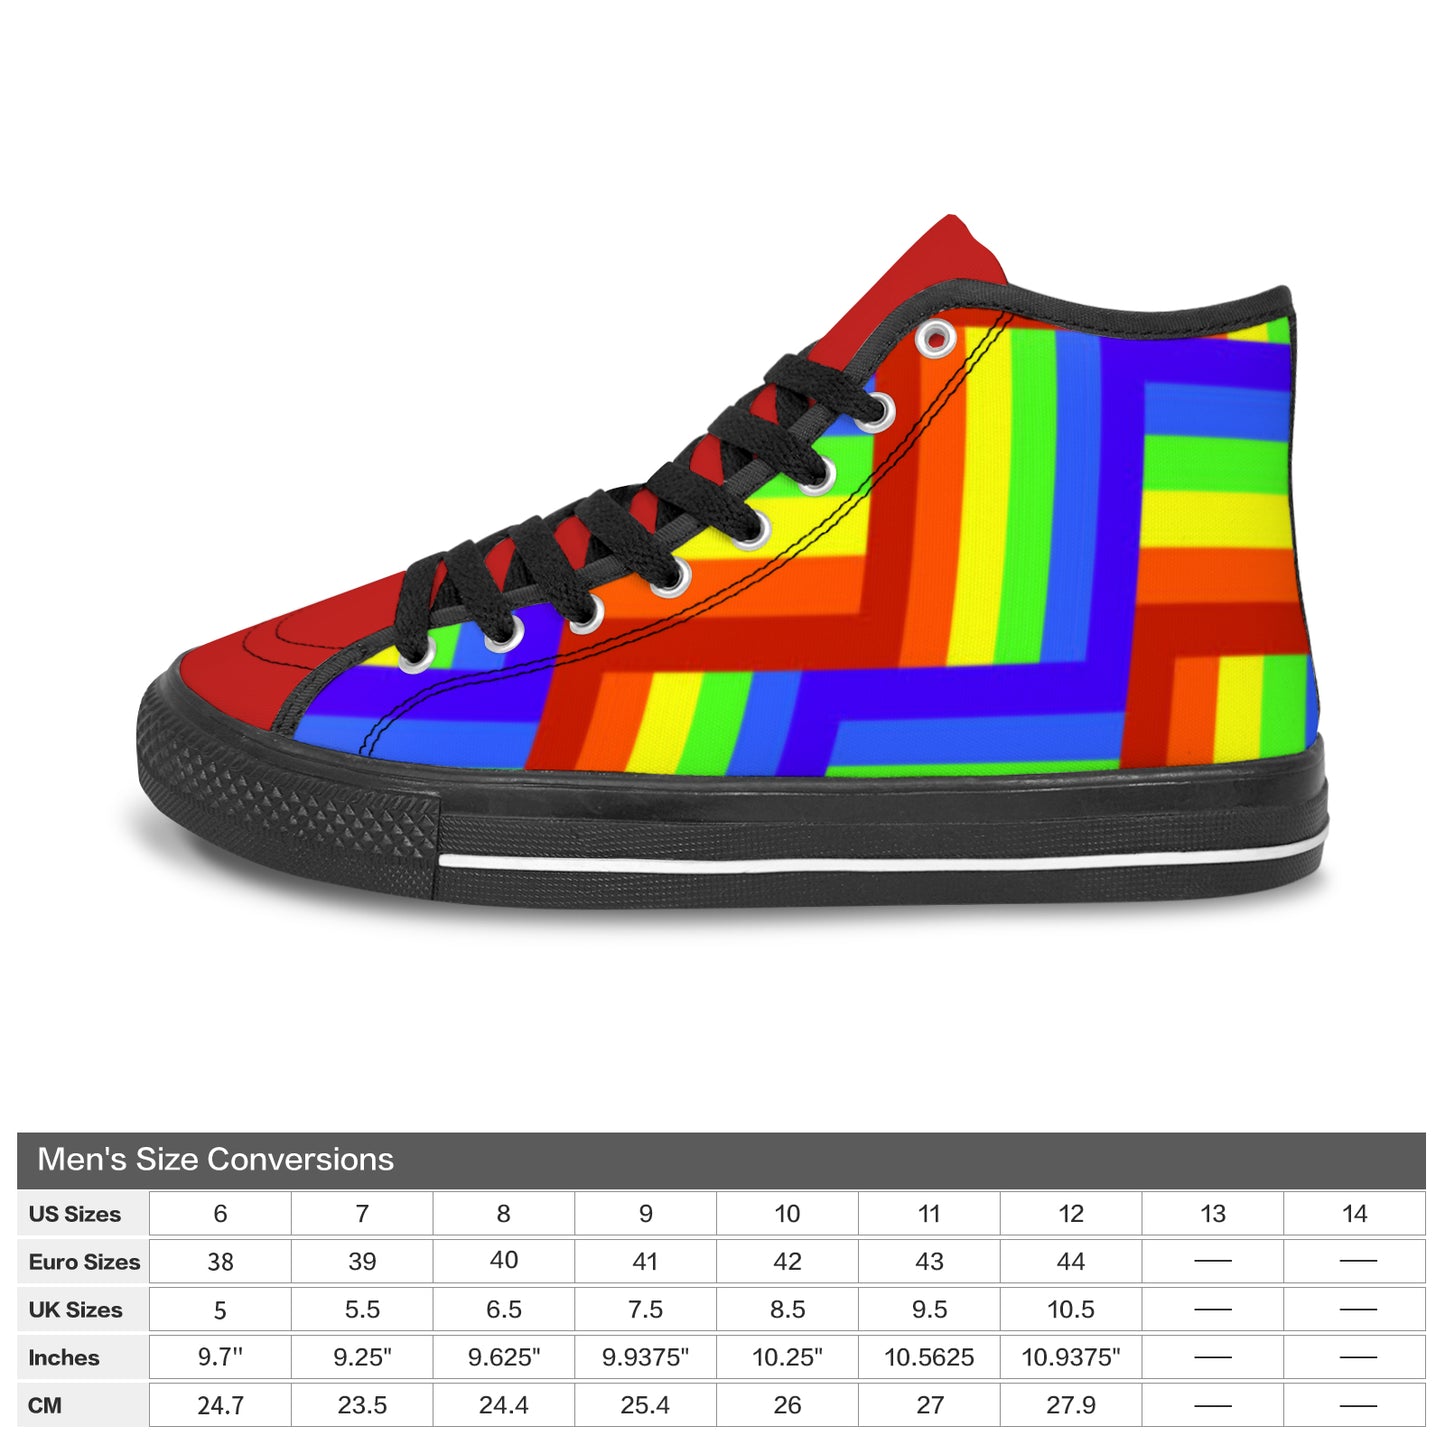 Vancouver High Top Canvas Men's Shoes - Red/Rainbow